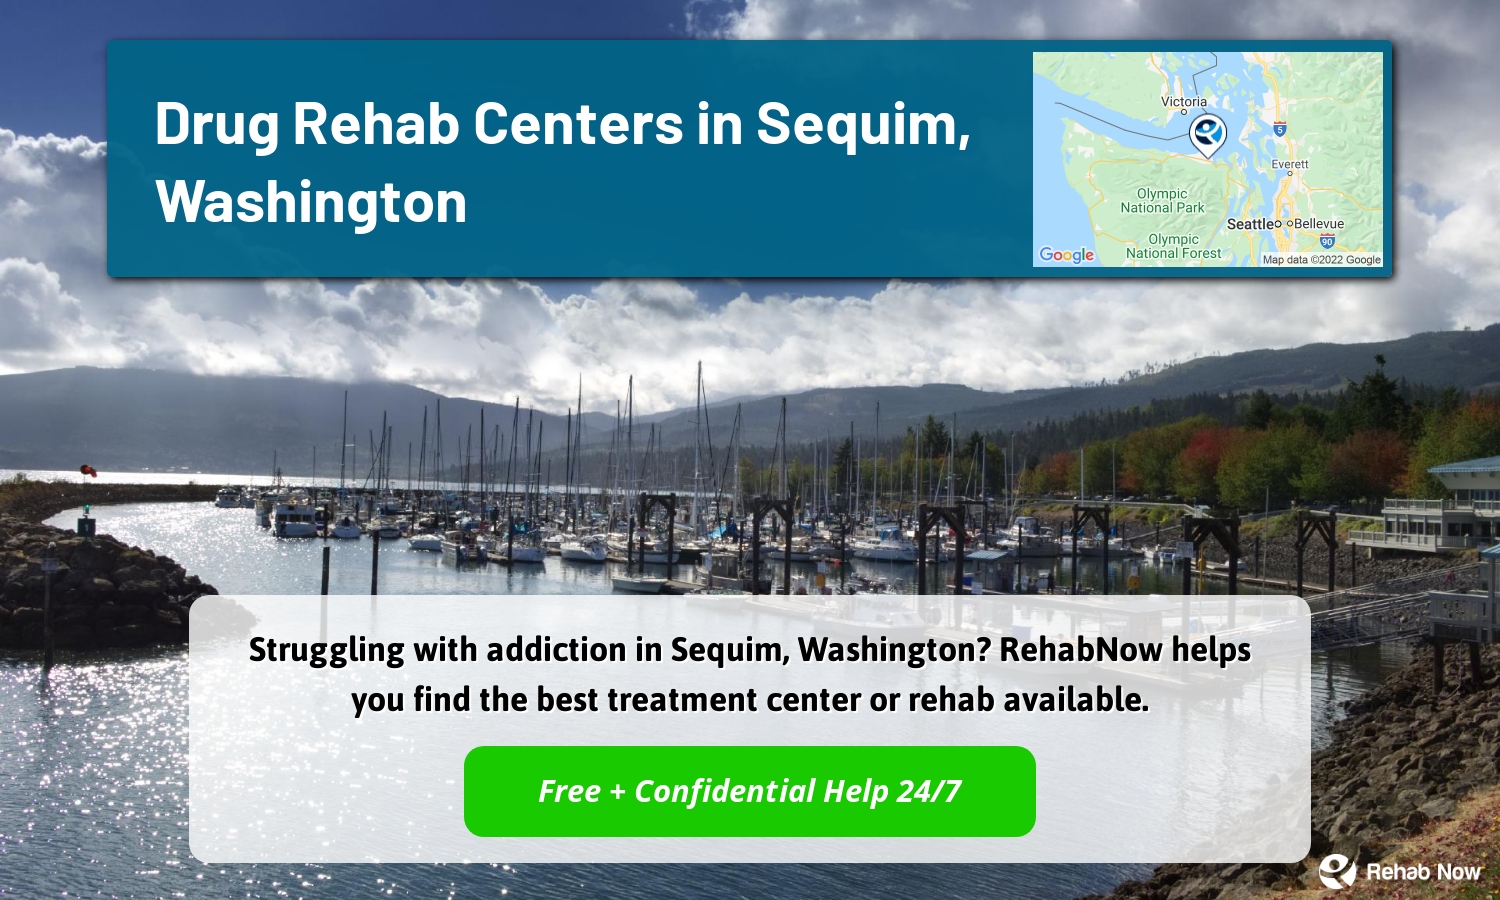 Struggling with addiction in Sequim, Washington? RehabNow helps you find the best treatment center or rehab available.